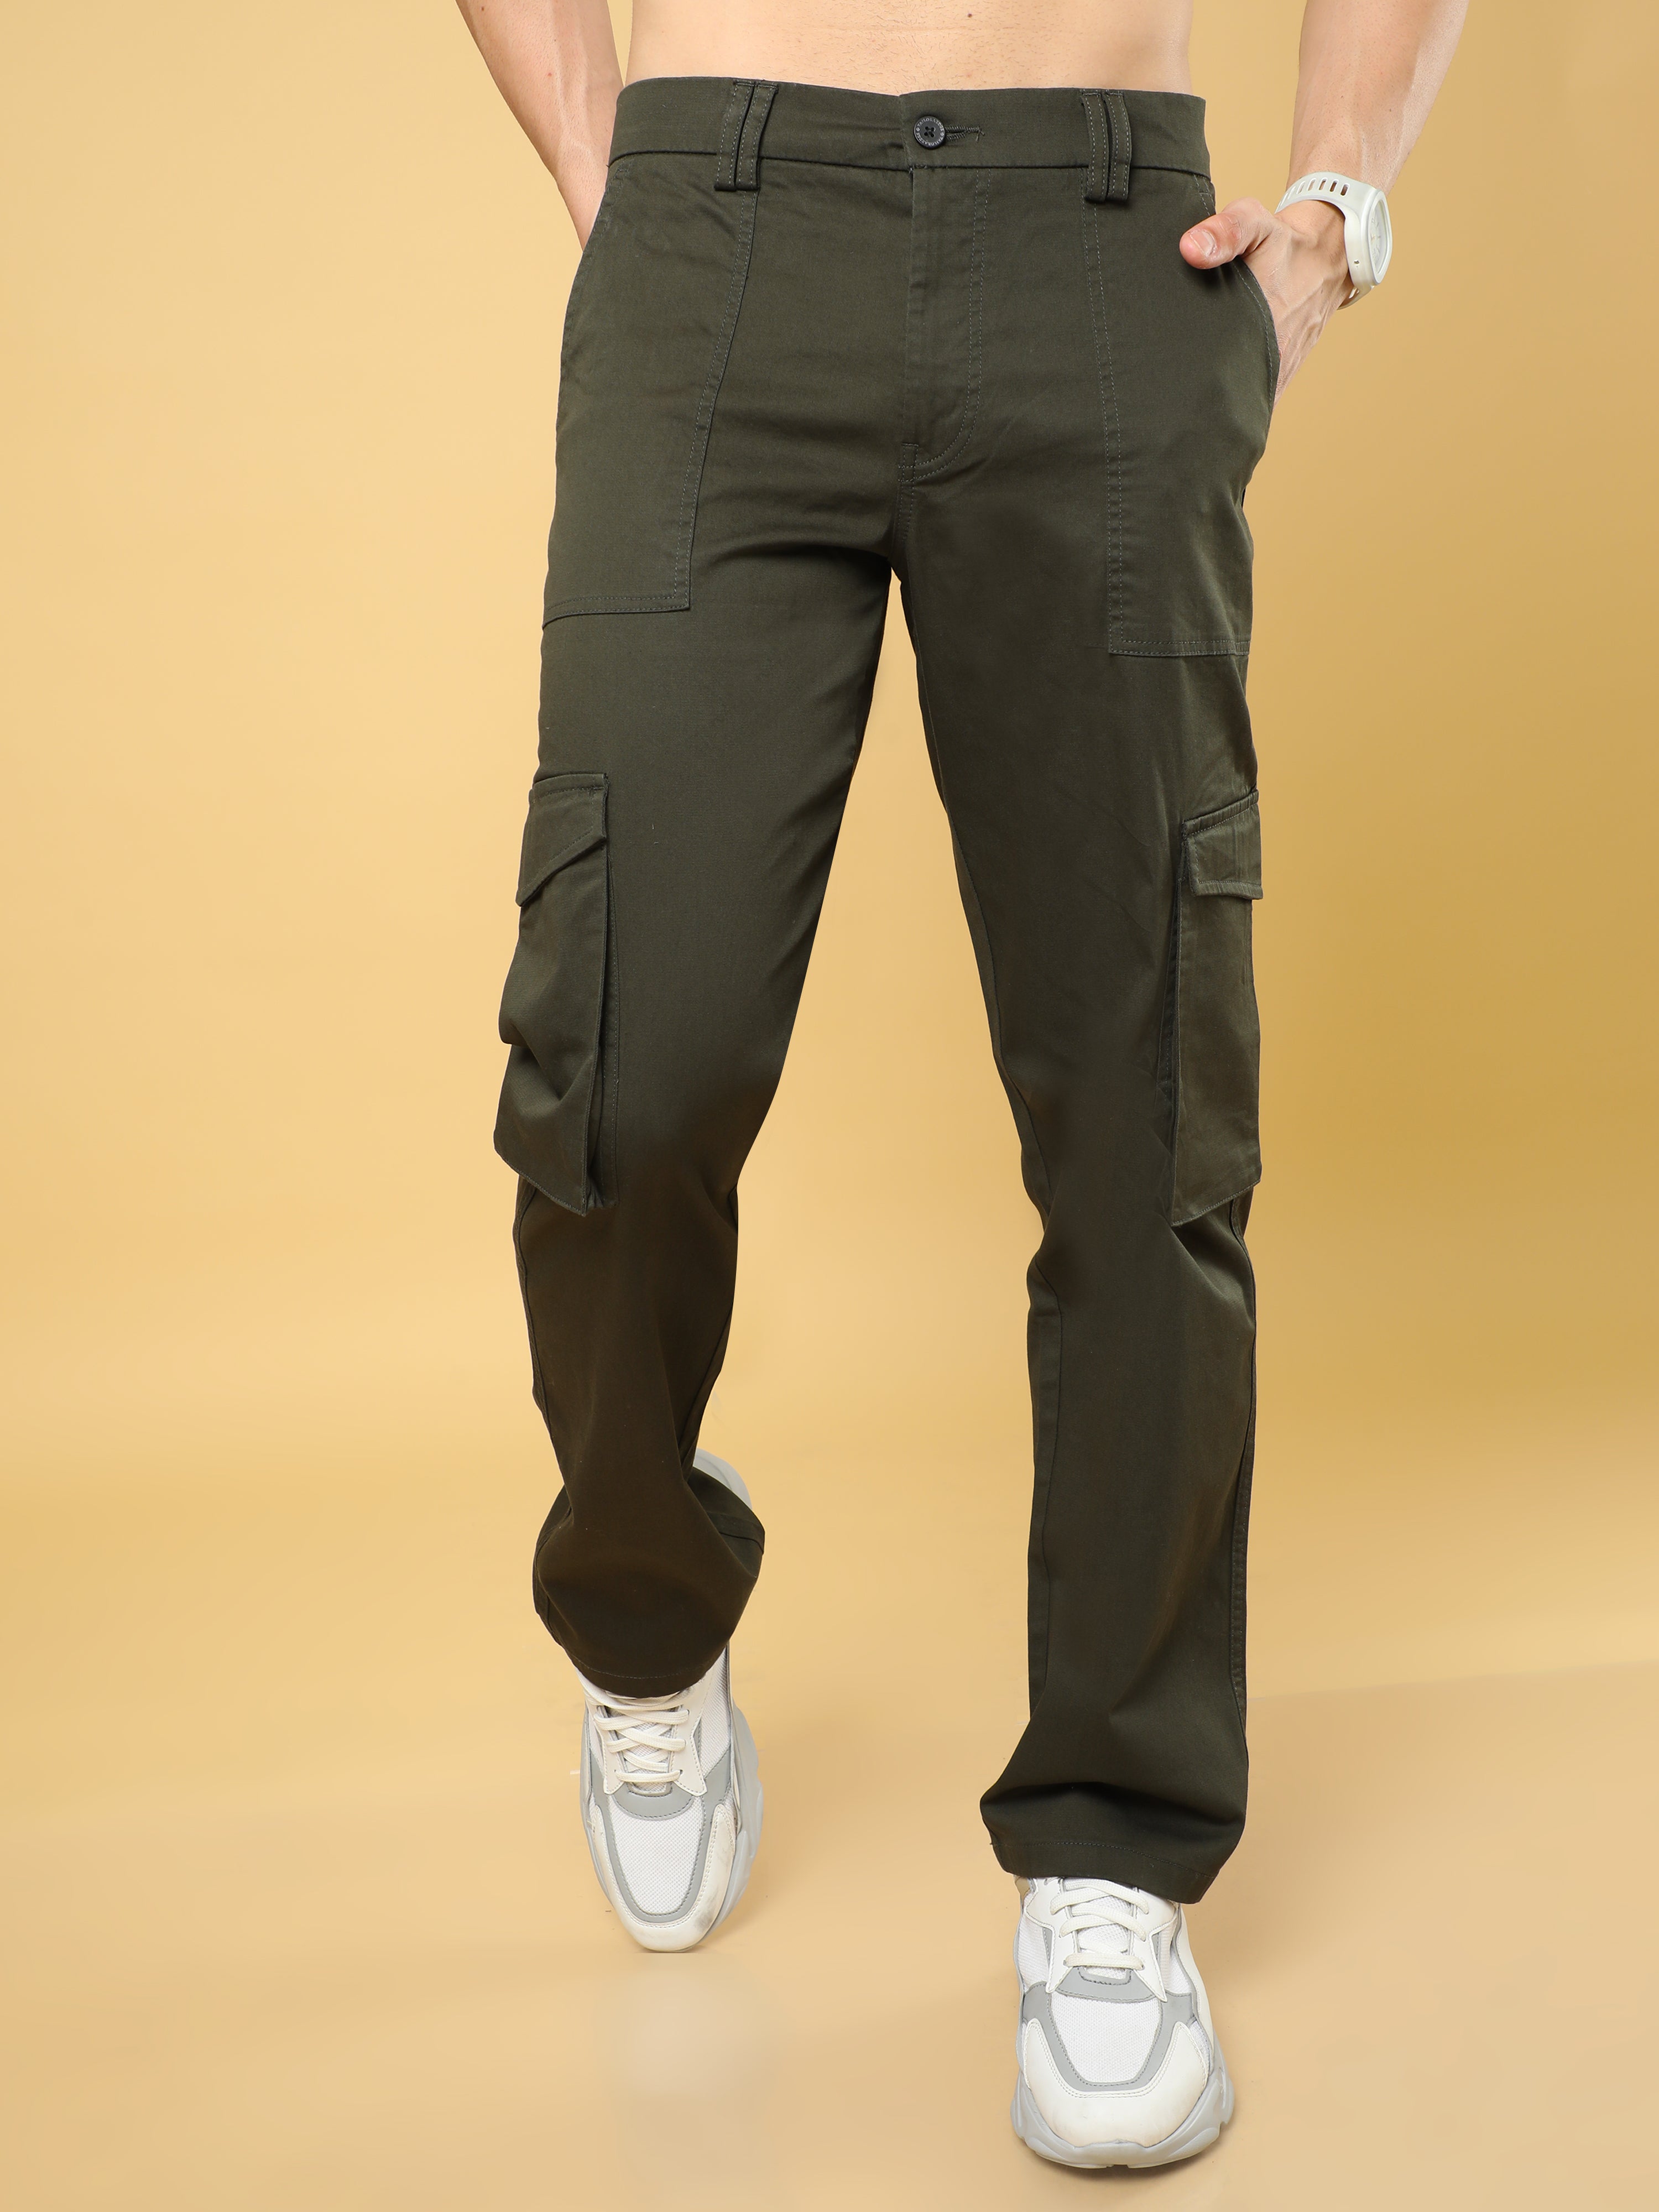 Cotton Dobby Baggy Fit Dark Olive Cargo